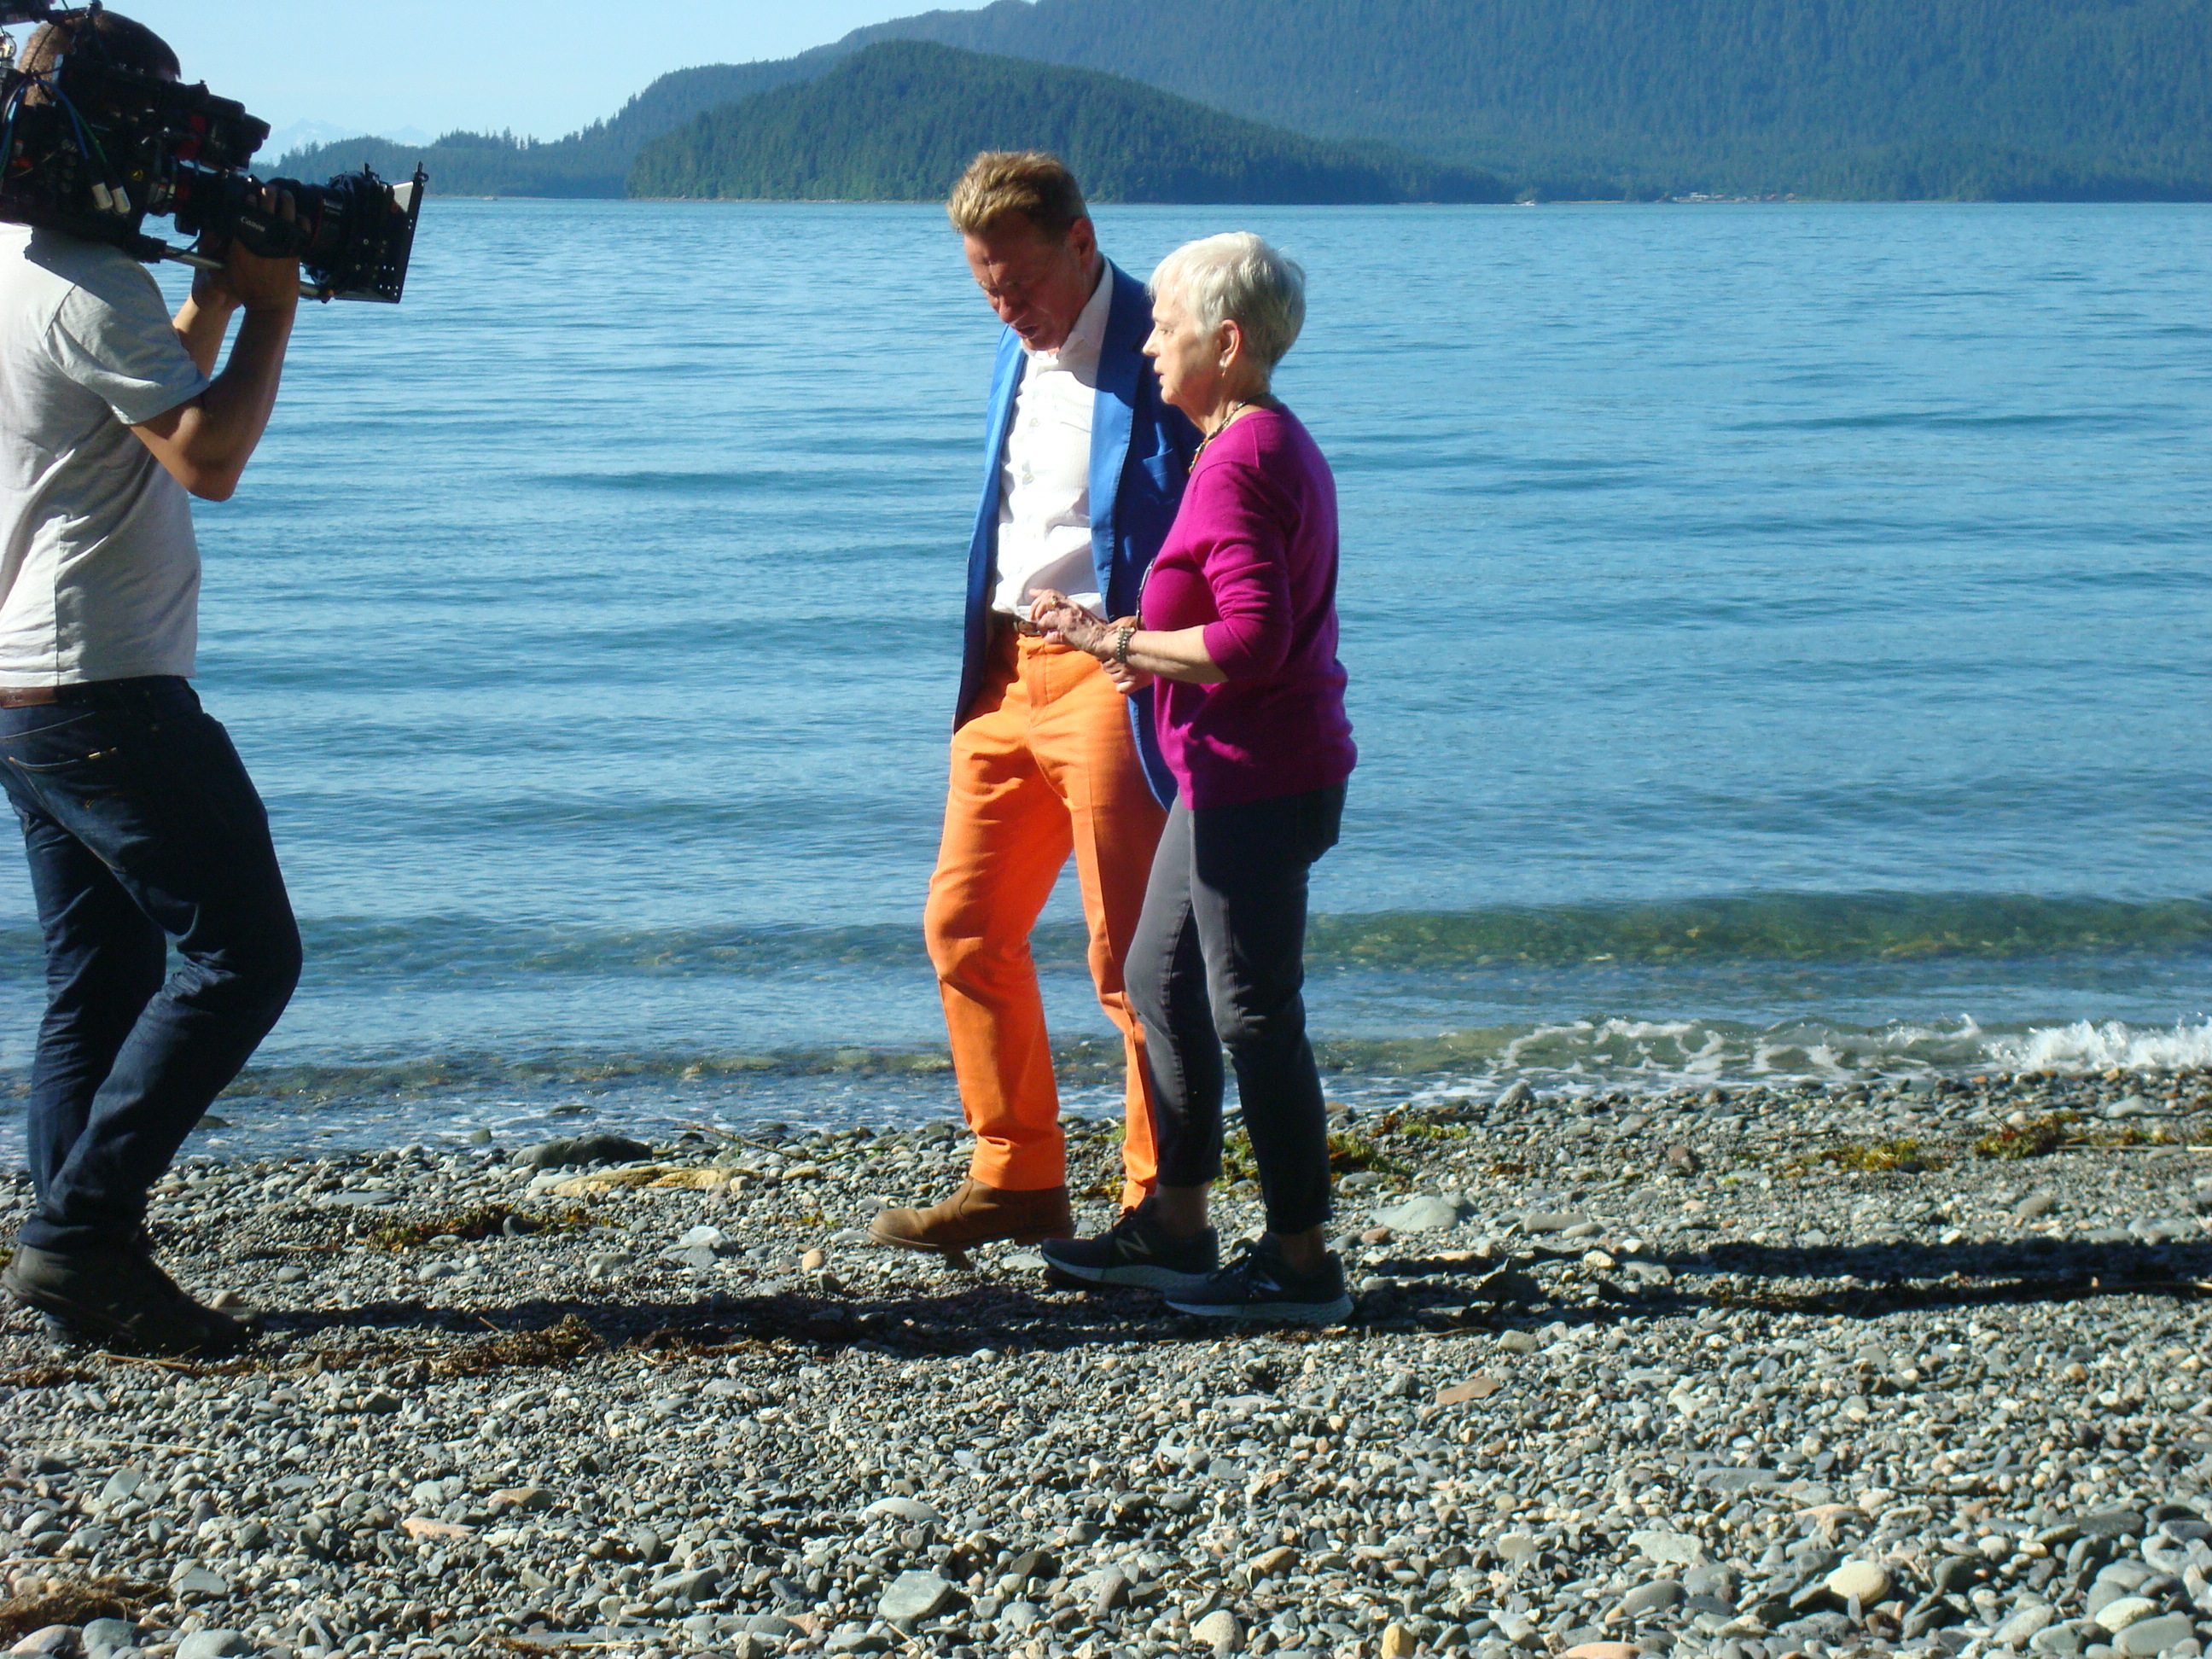 In Juneau Michael Portillo and Diana Parsell